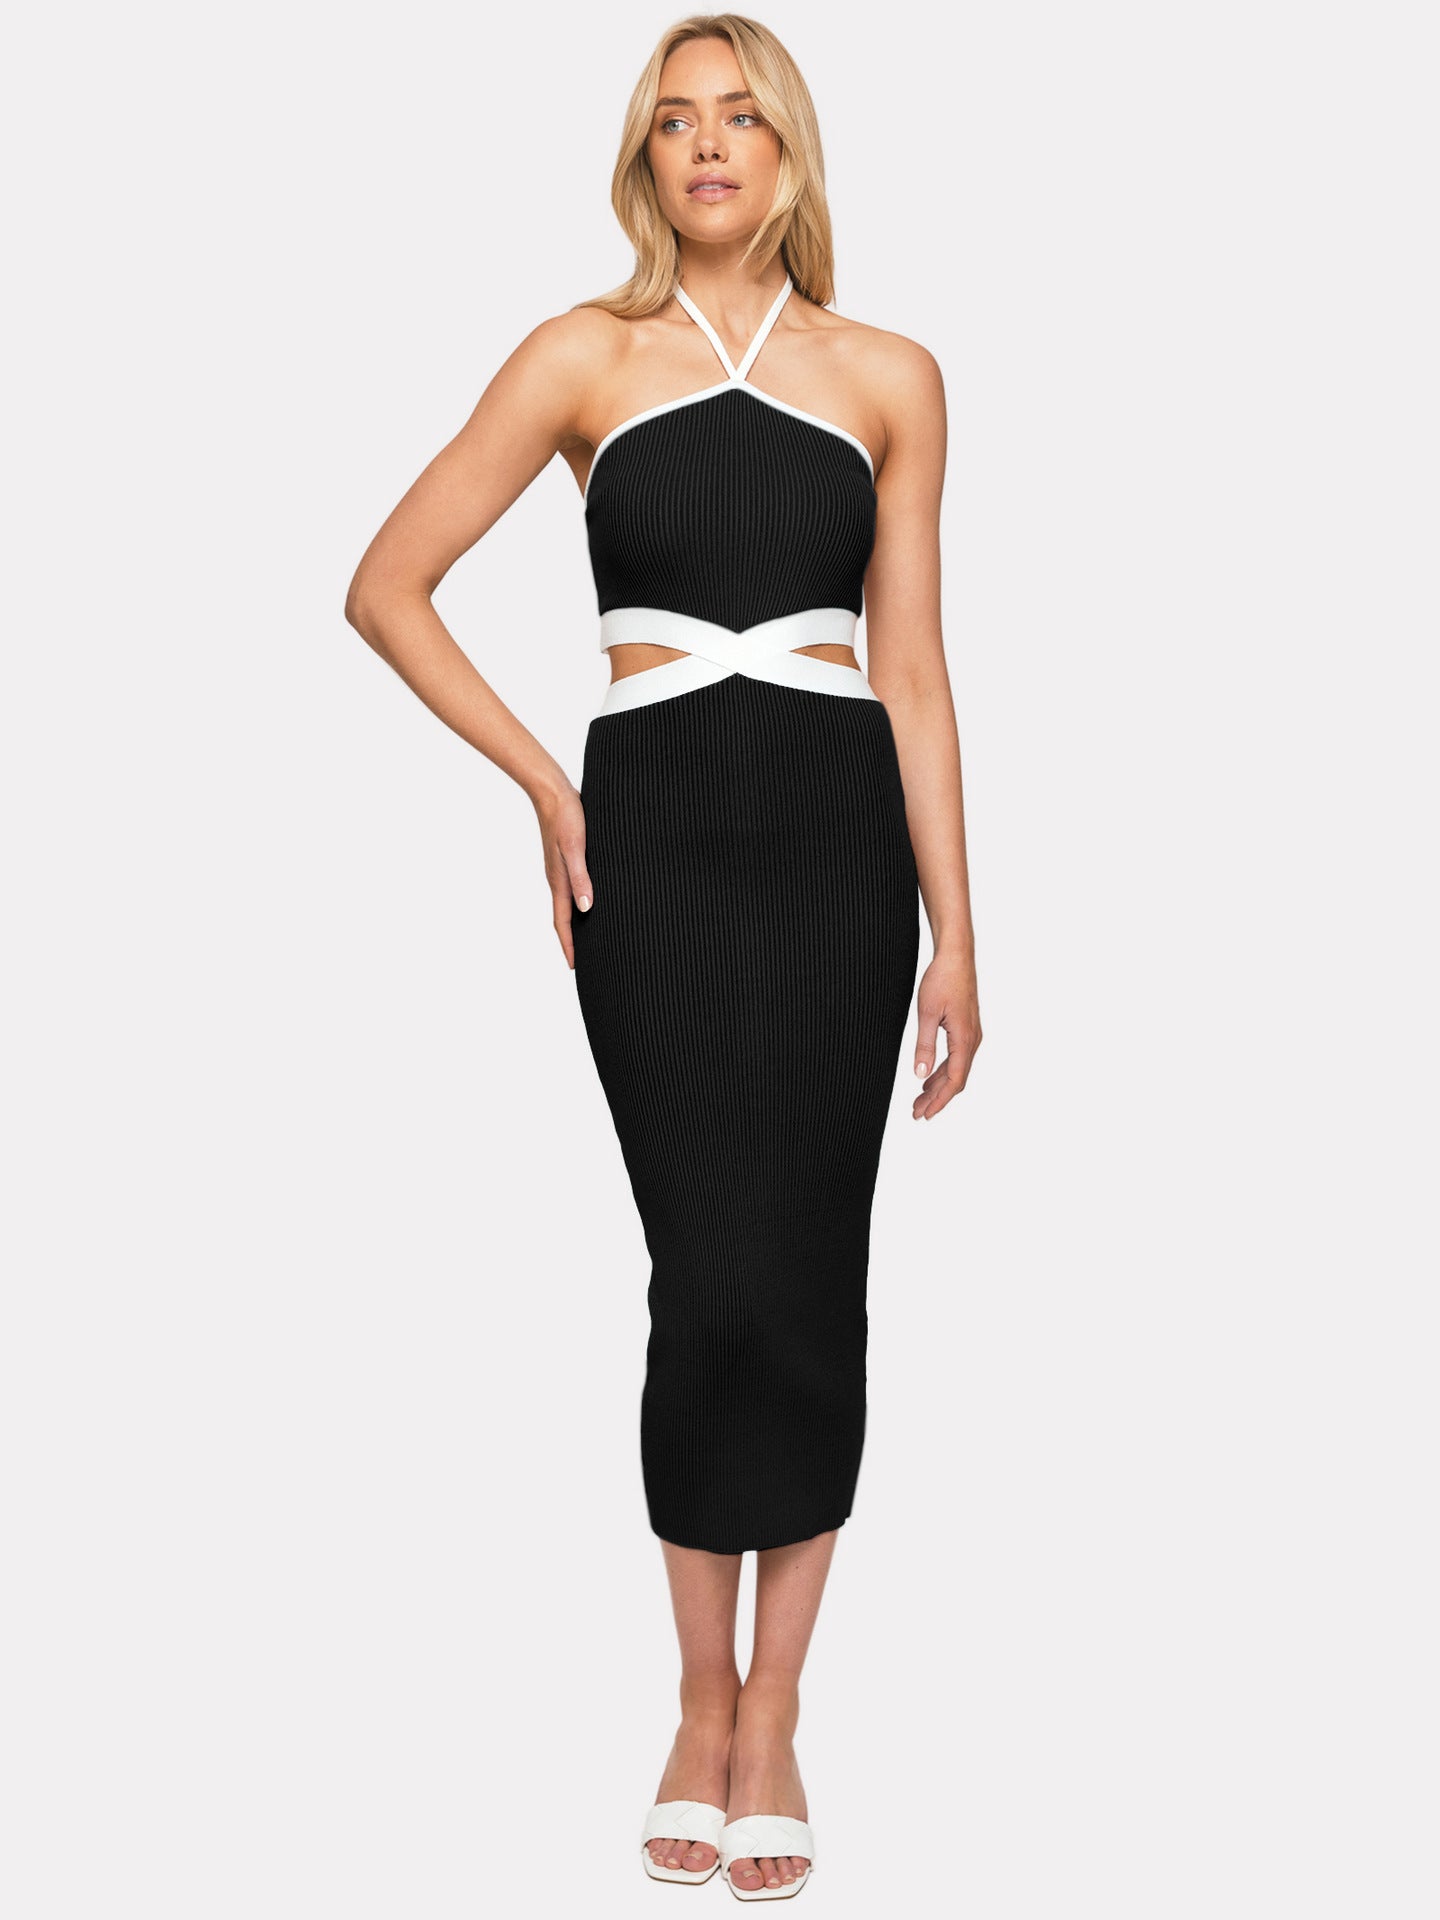 Rope Halter Backless Hollow Out Cutout  Tight Rib Dress